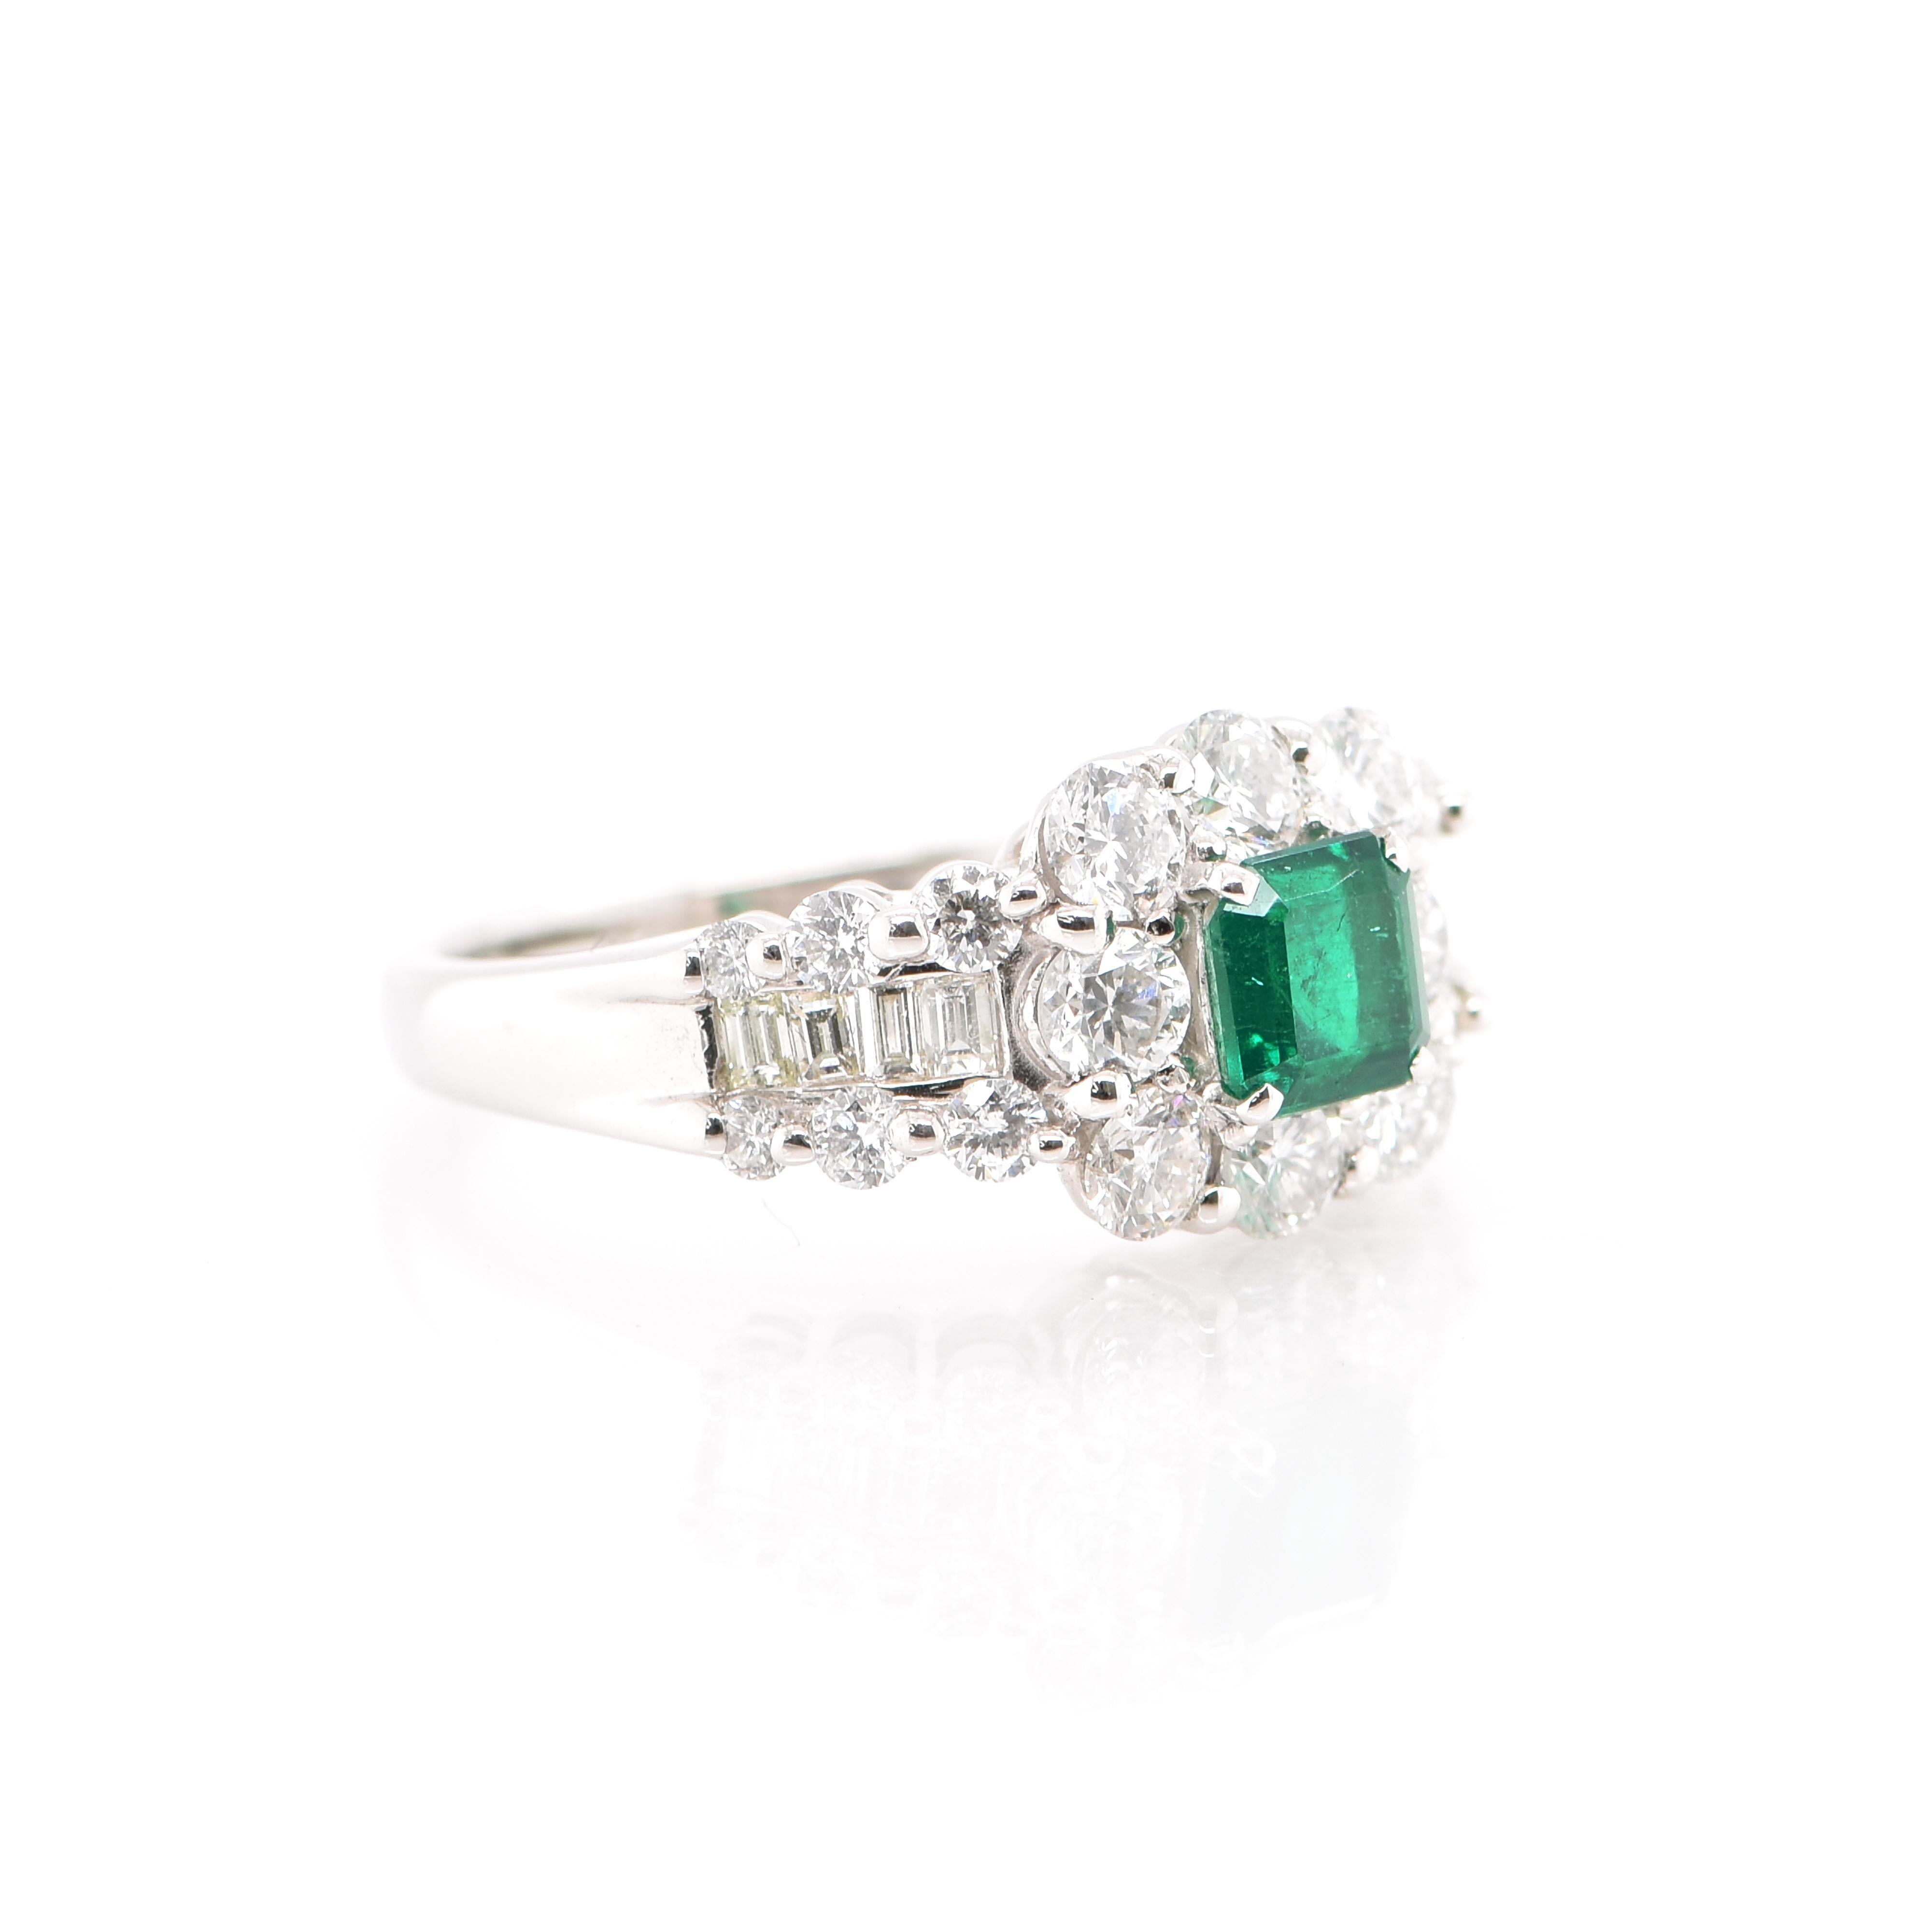 Modern GIA Certified 0.73 Carat Colombian Emerald and Diamond Ring Set in Platinum For Sale